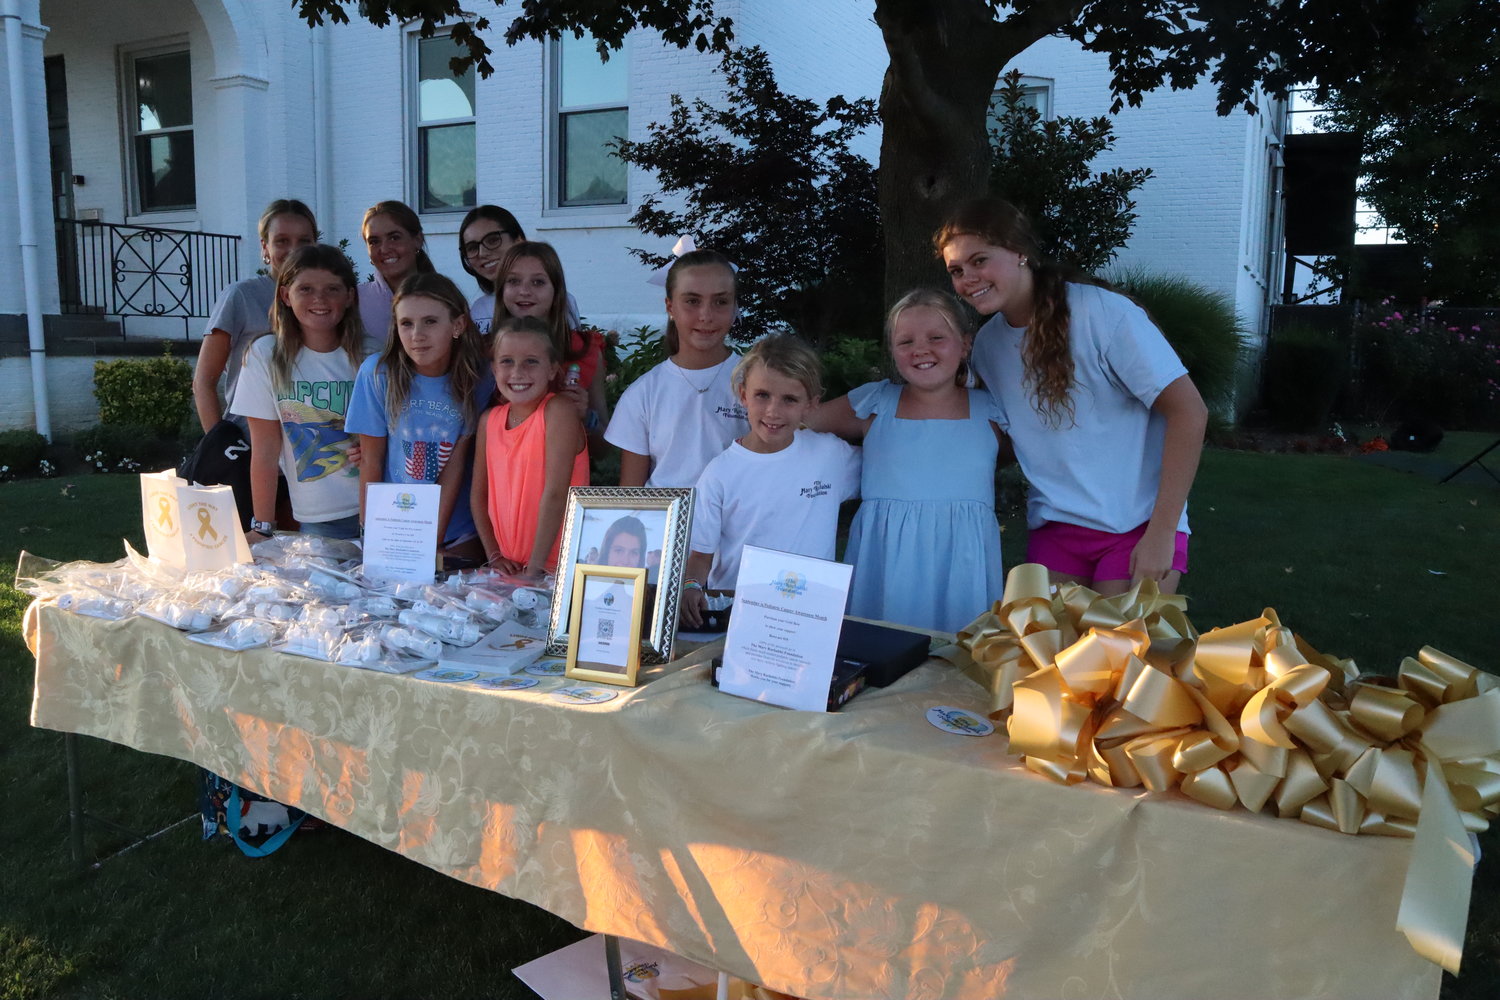 Children pitched in to help raise money for the Mary Ruchalski foundation by selling gold bows and luminarias to “Light it Up Gold” for pediatric cancer awareness.